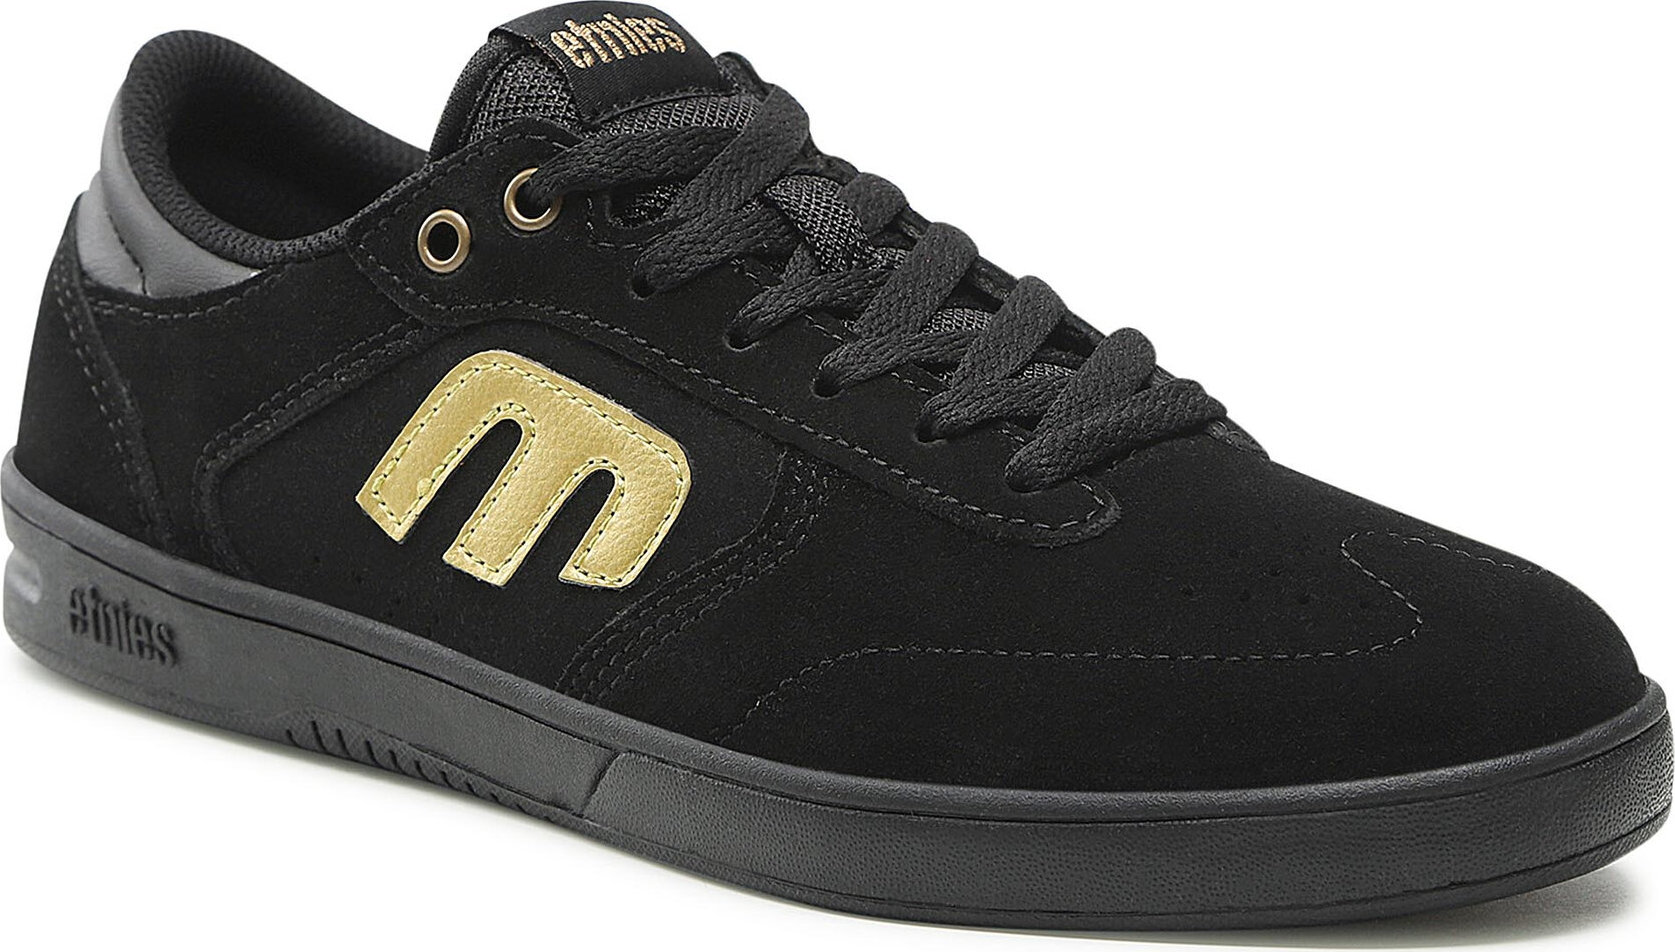 Sneakersy Etnies Windrow 4101000551 Black/Gold 970